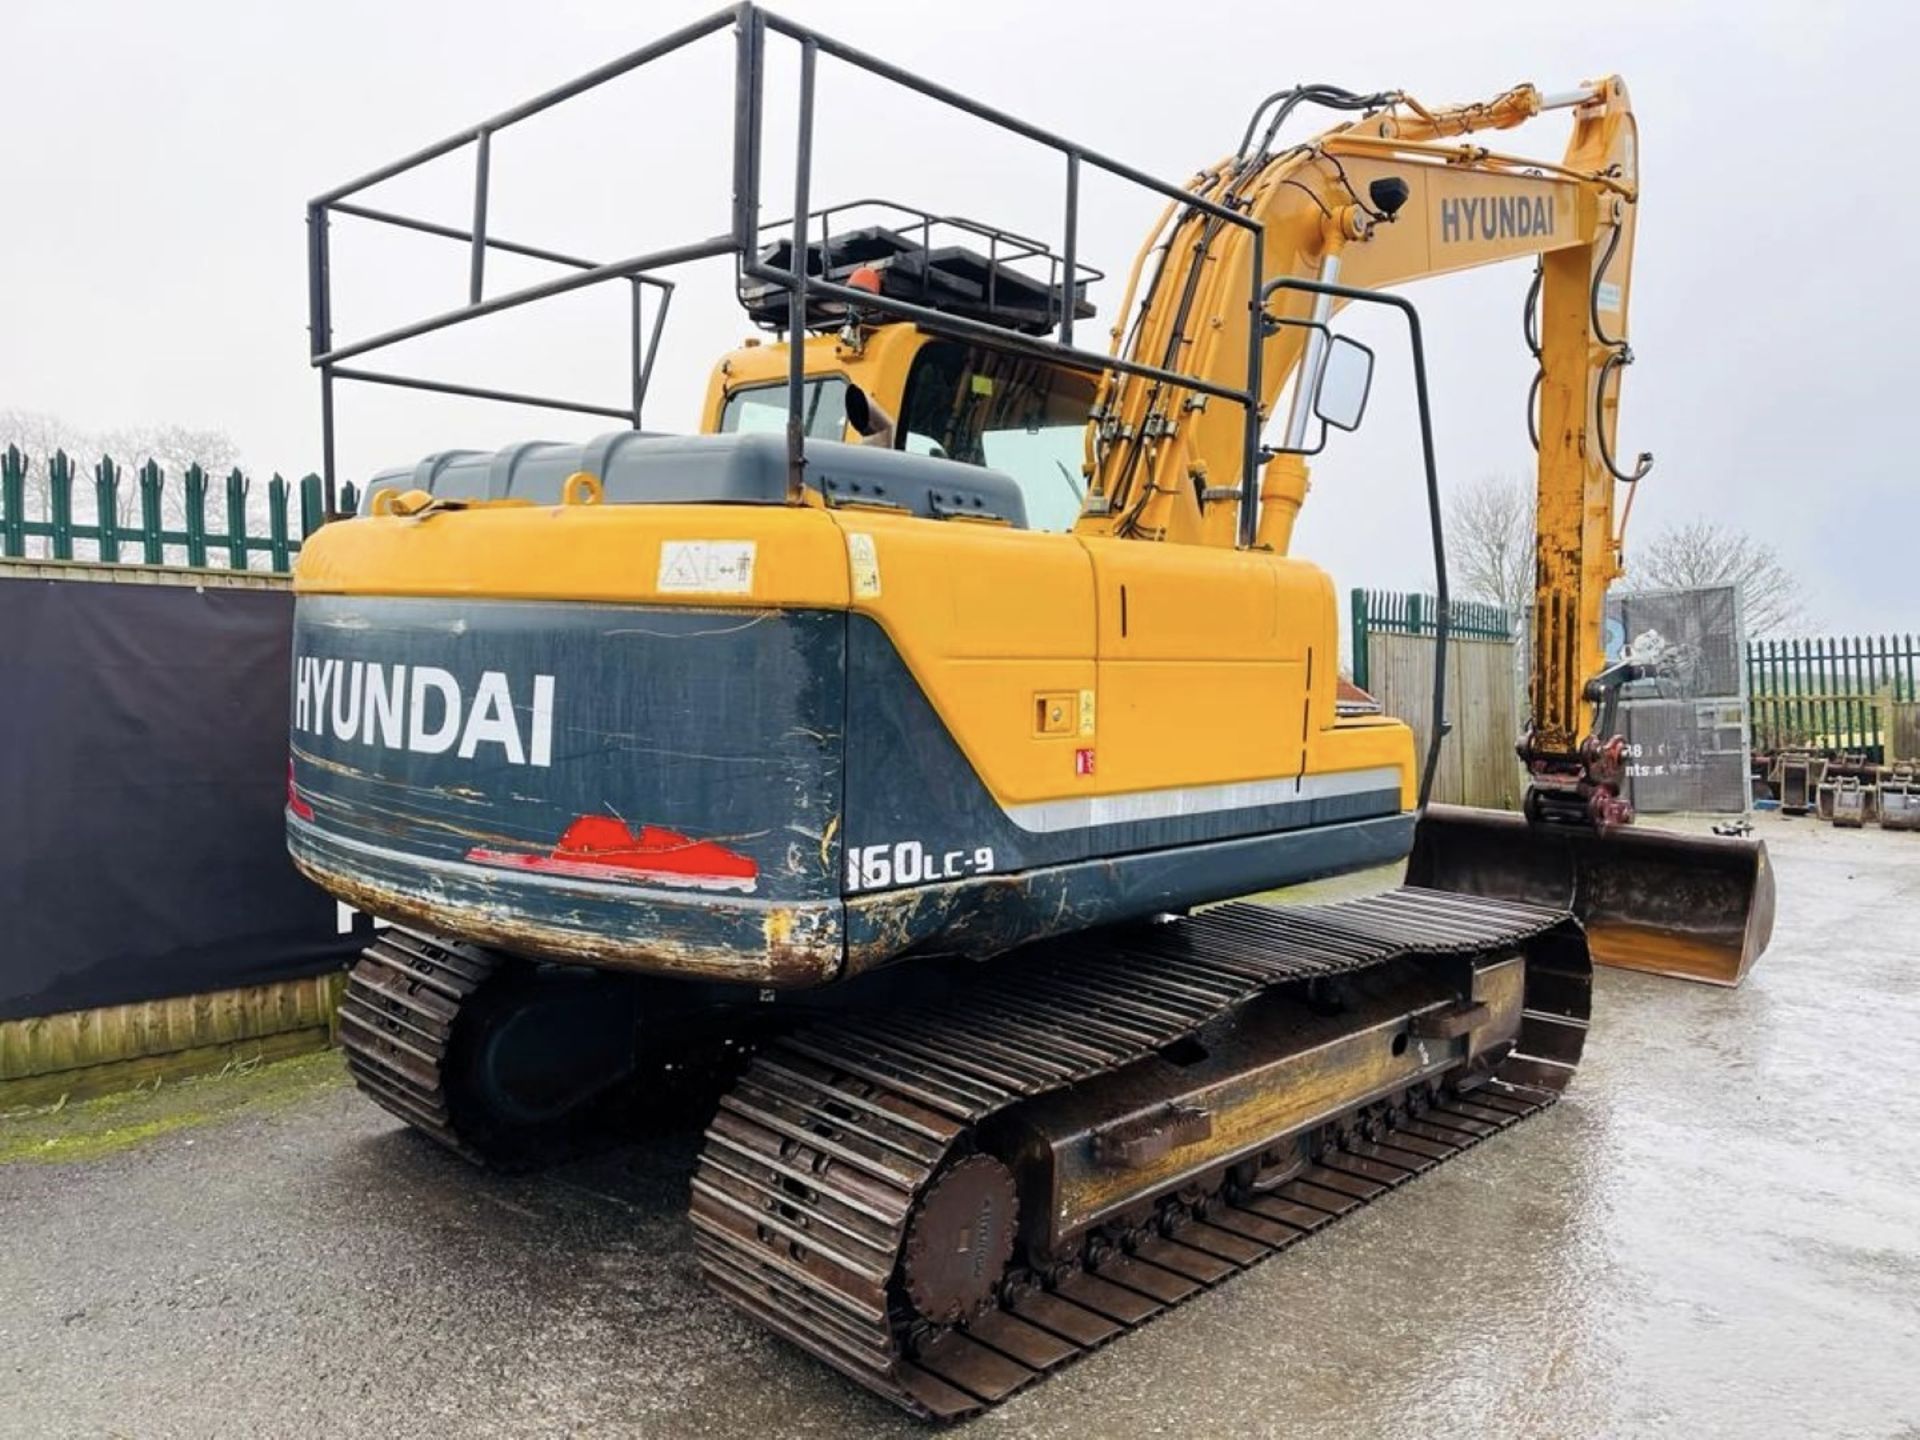 2013, HYUNDAI R160 LC-9 EXCAVATORHYUNDAI R160 LC-9 EXCAVATOR - Image 6 of 16